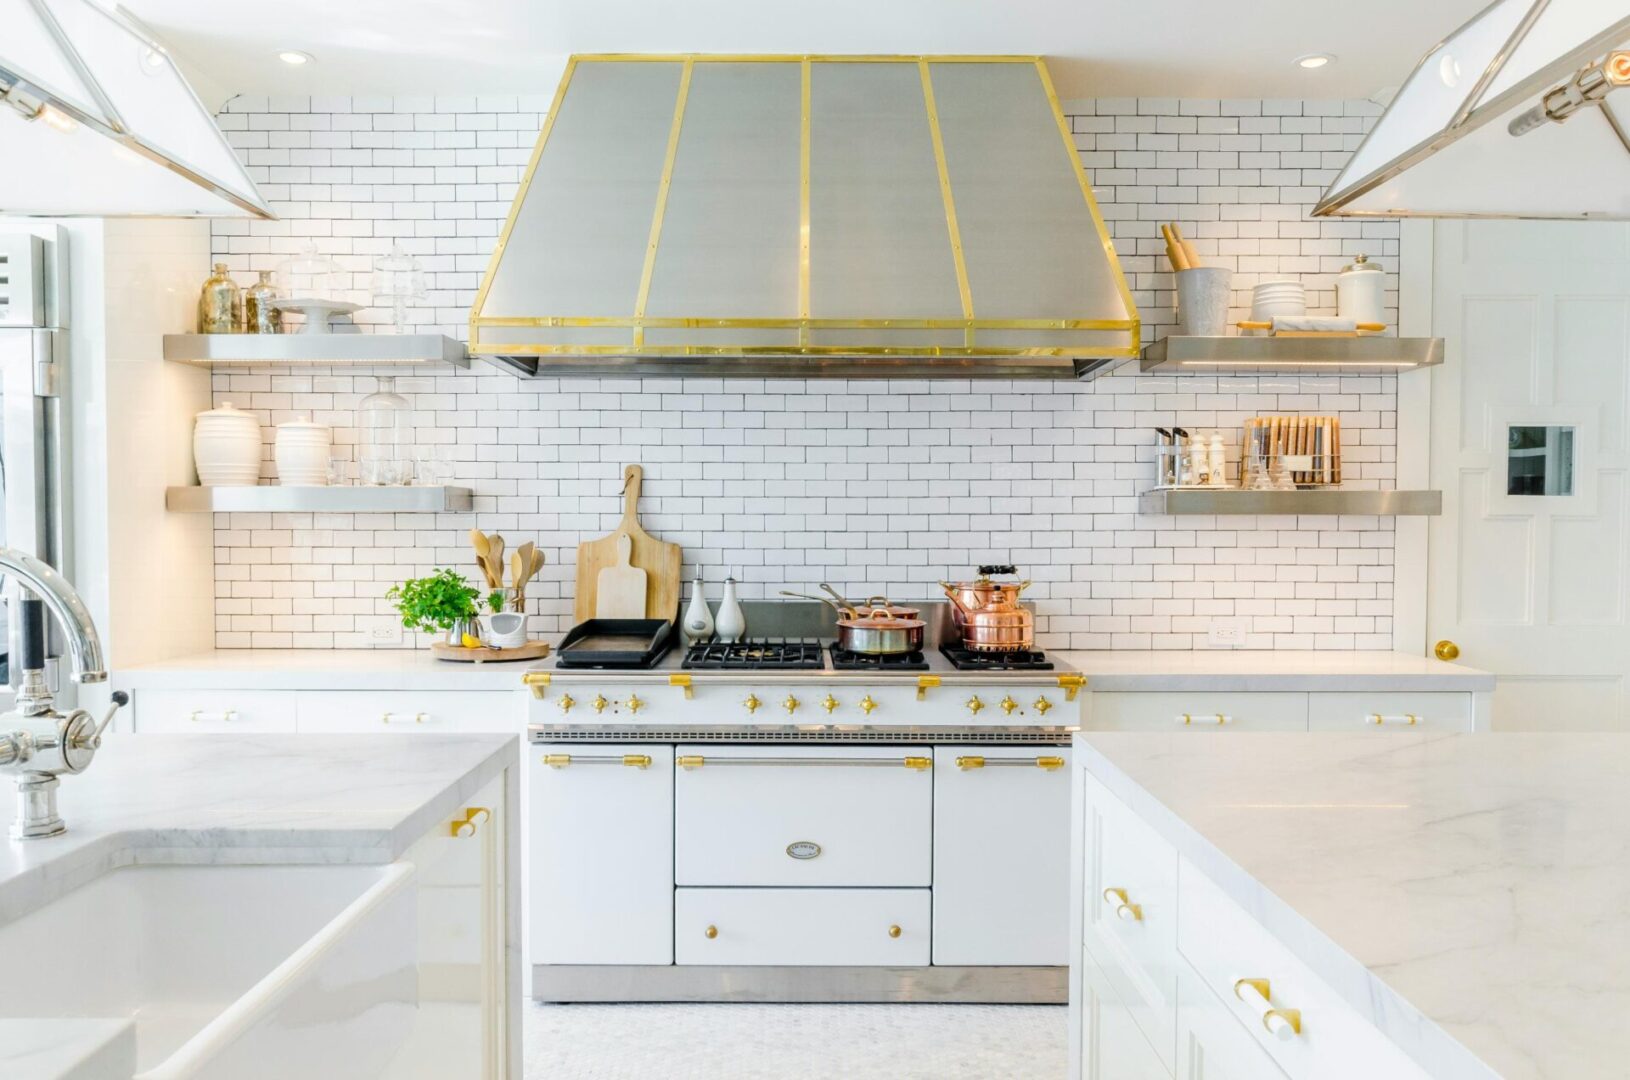 Modern kitchen with white cabinetry, marble countertops, and gold accents.